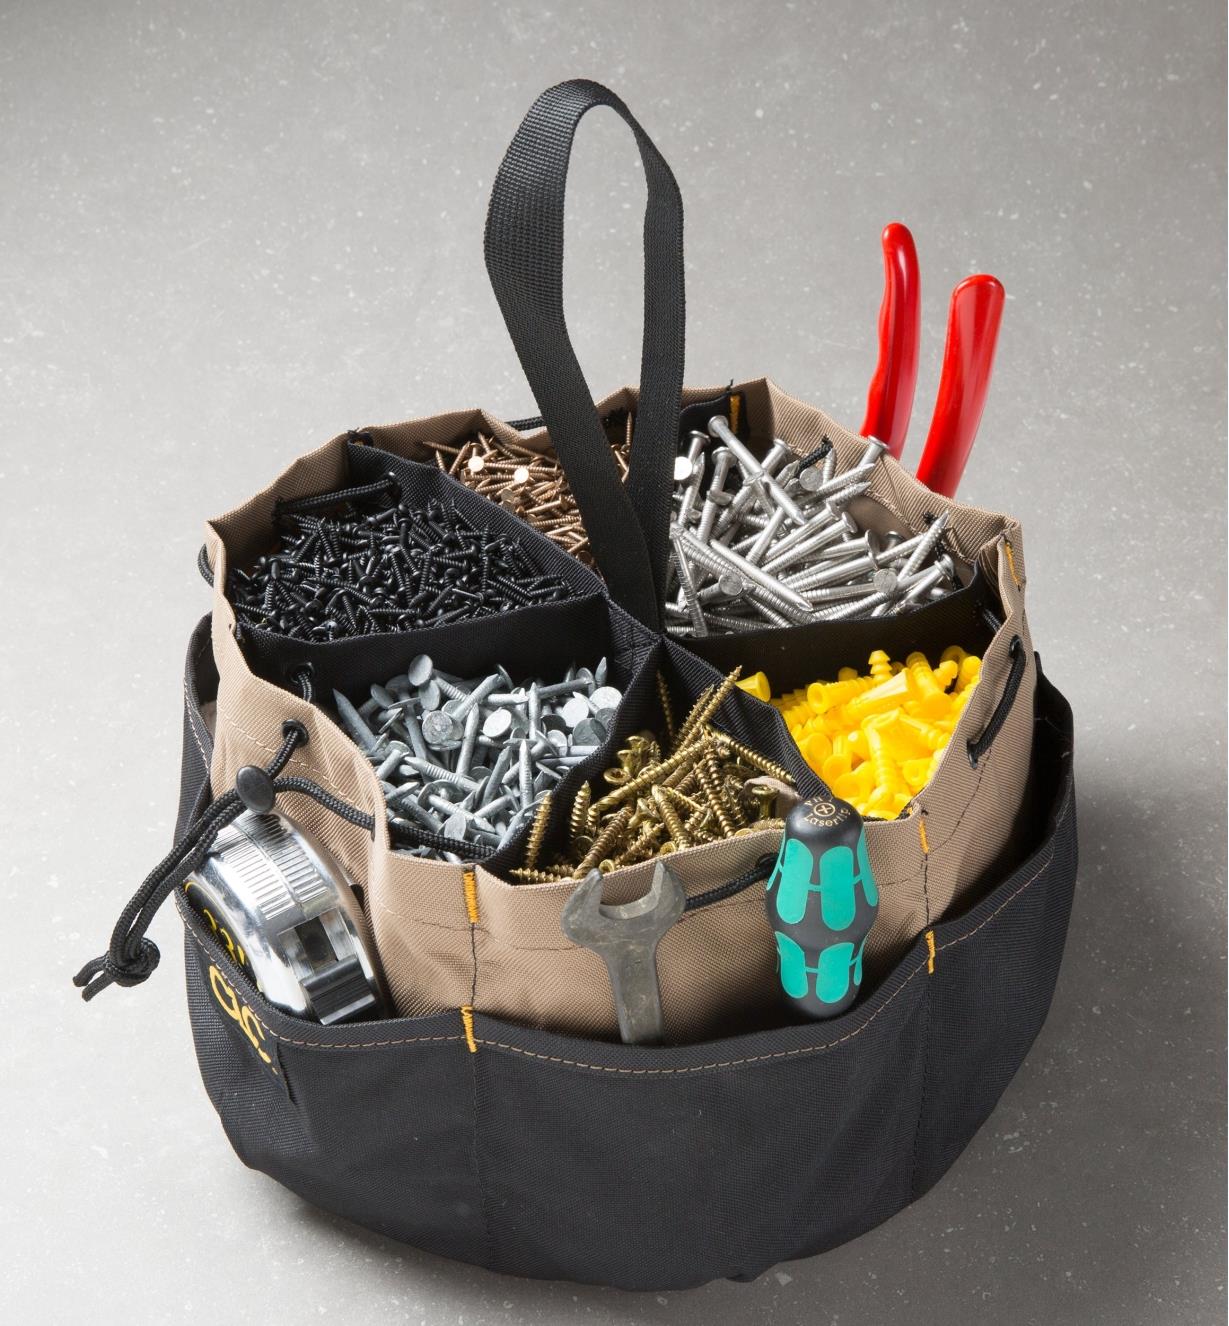 Drawstring Parts Organizer filled with fasteners and hand tools